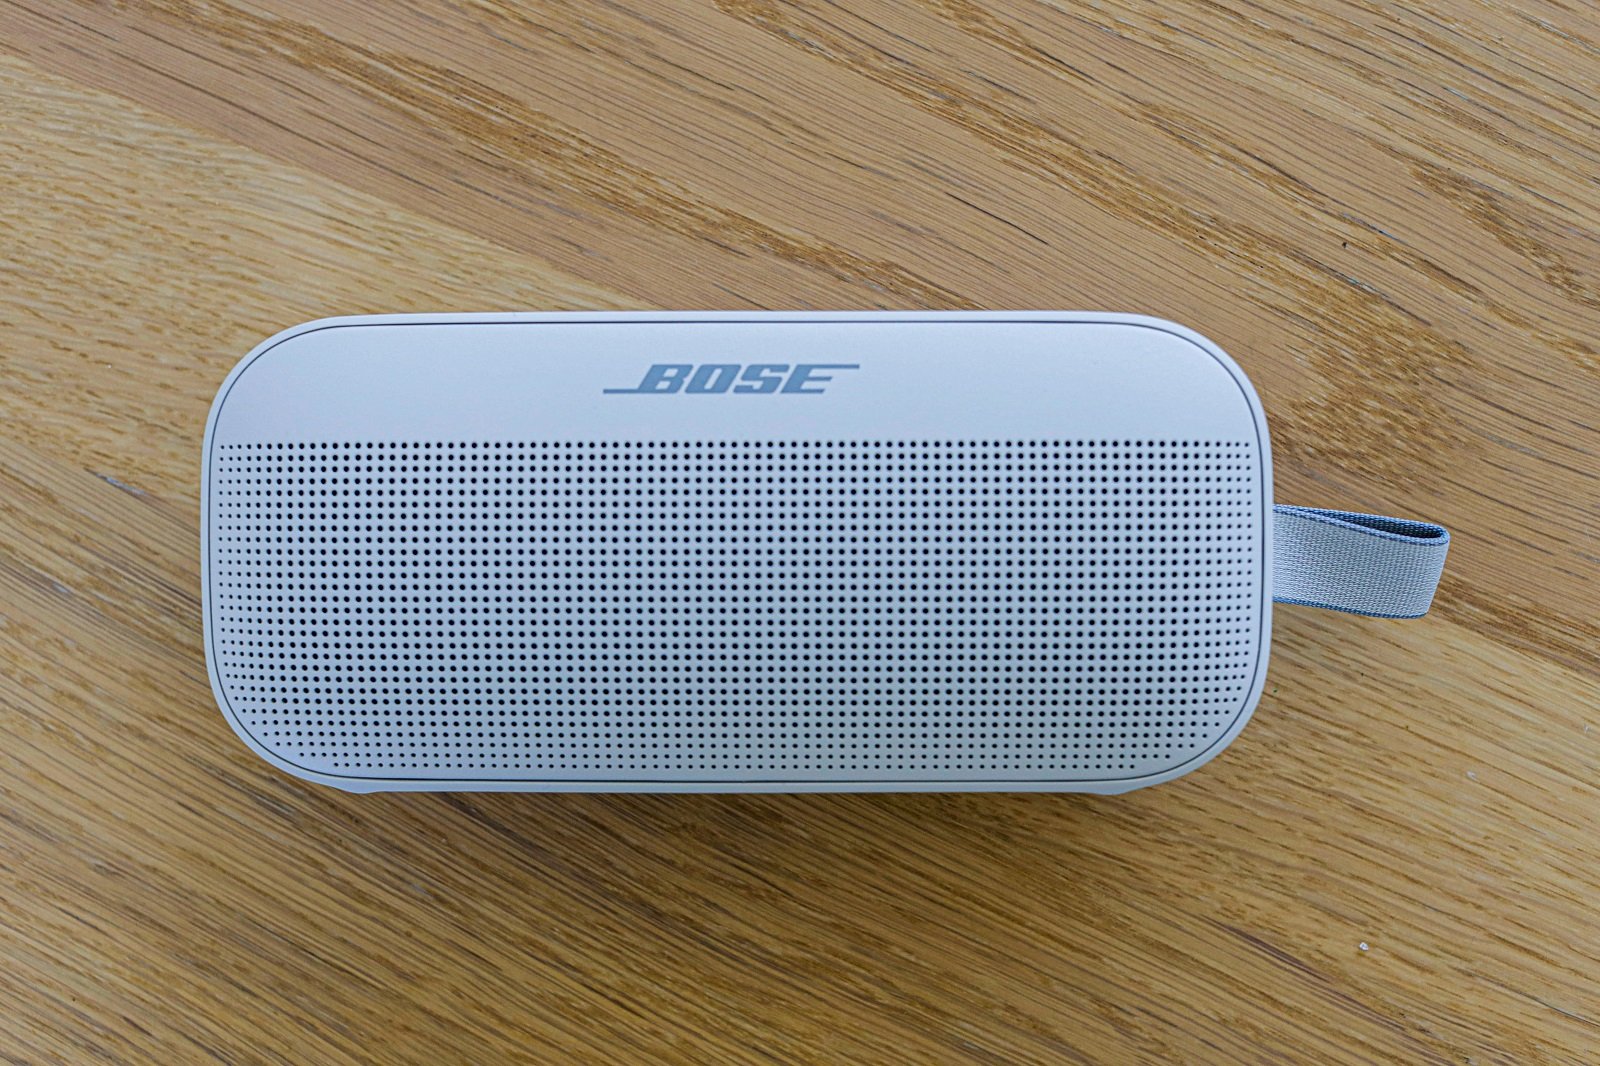 Bose's new rugged Bluetooth speaker floats in water